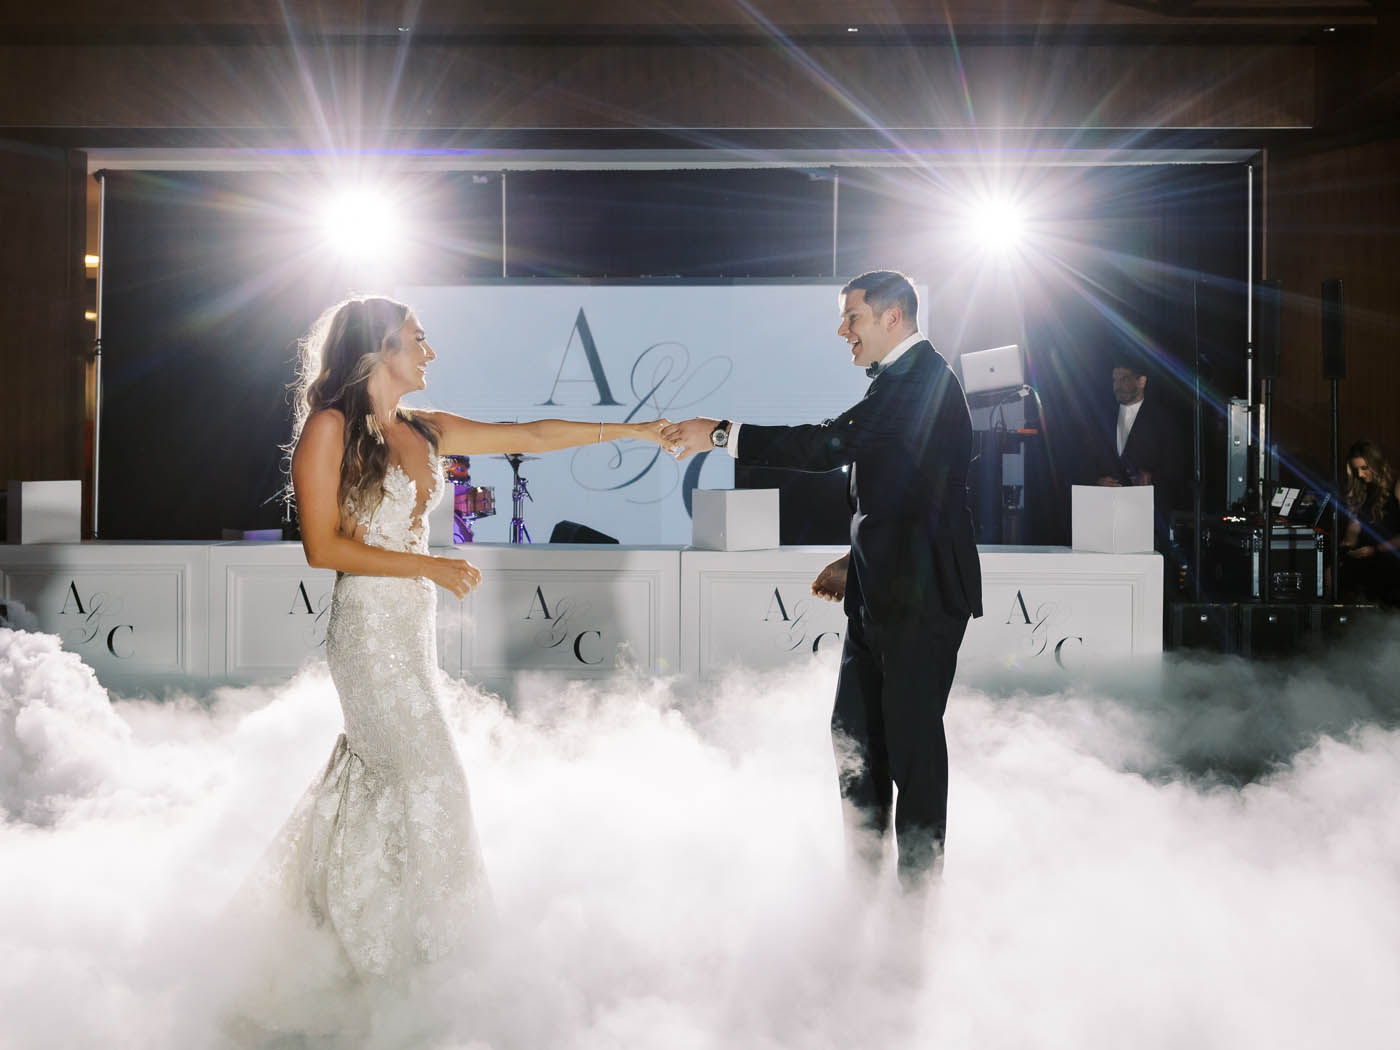 the couple shares their first dance as smoke fills the dance floor